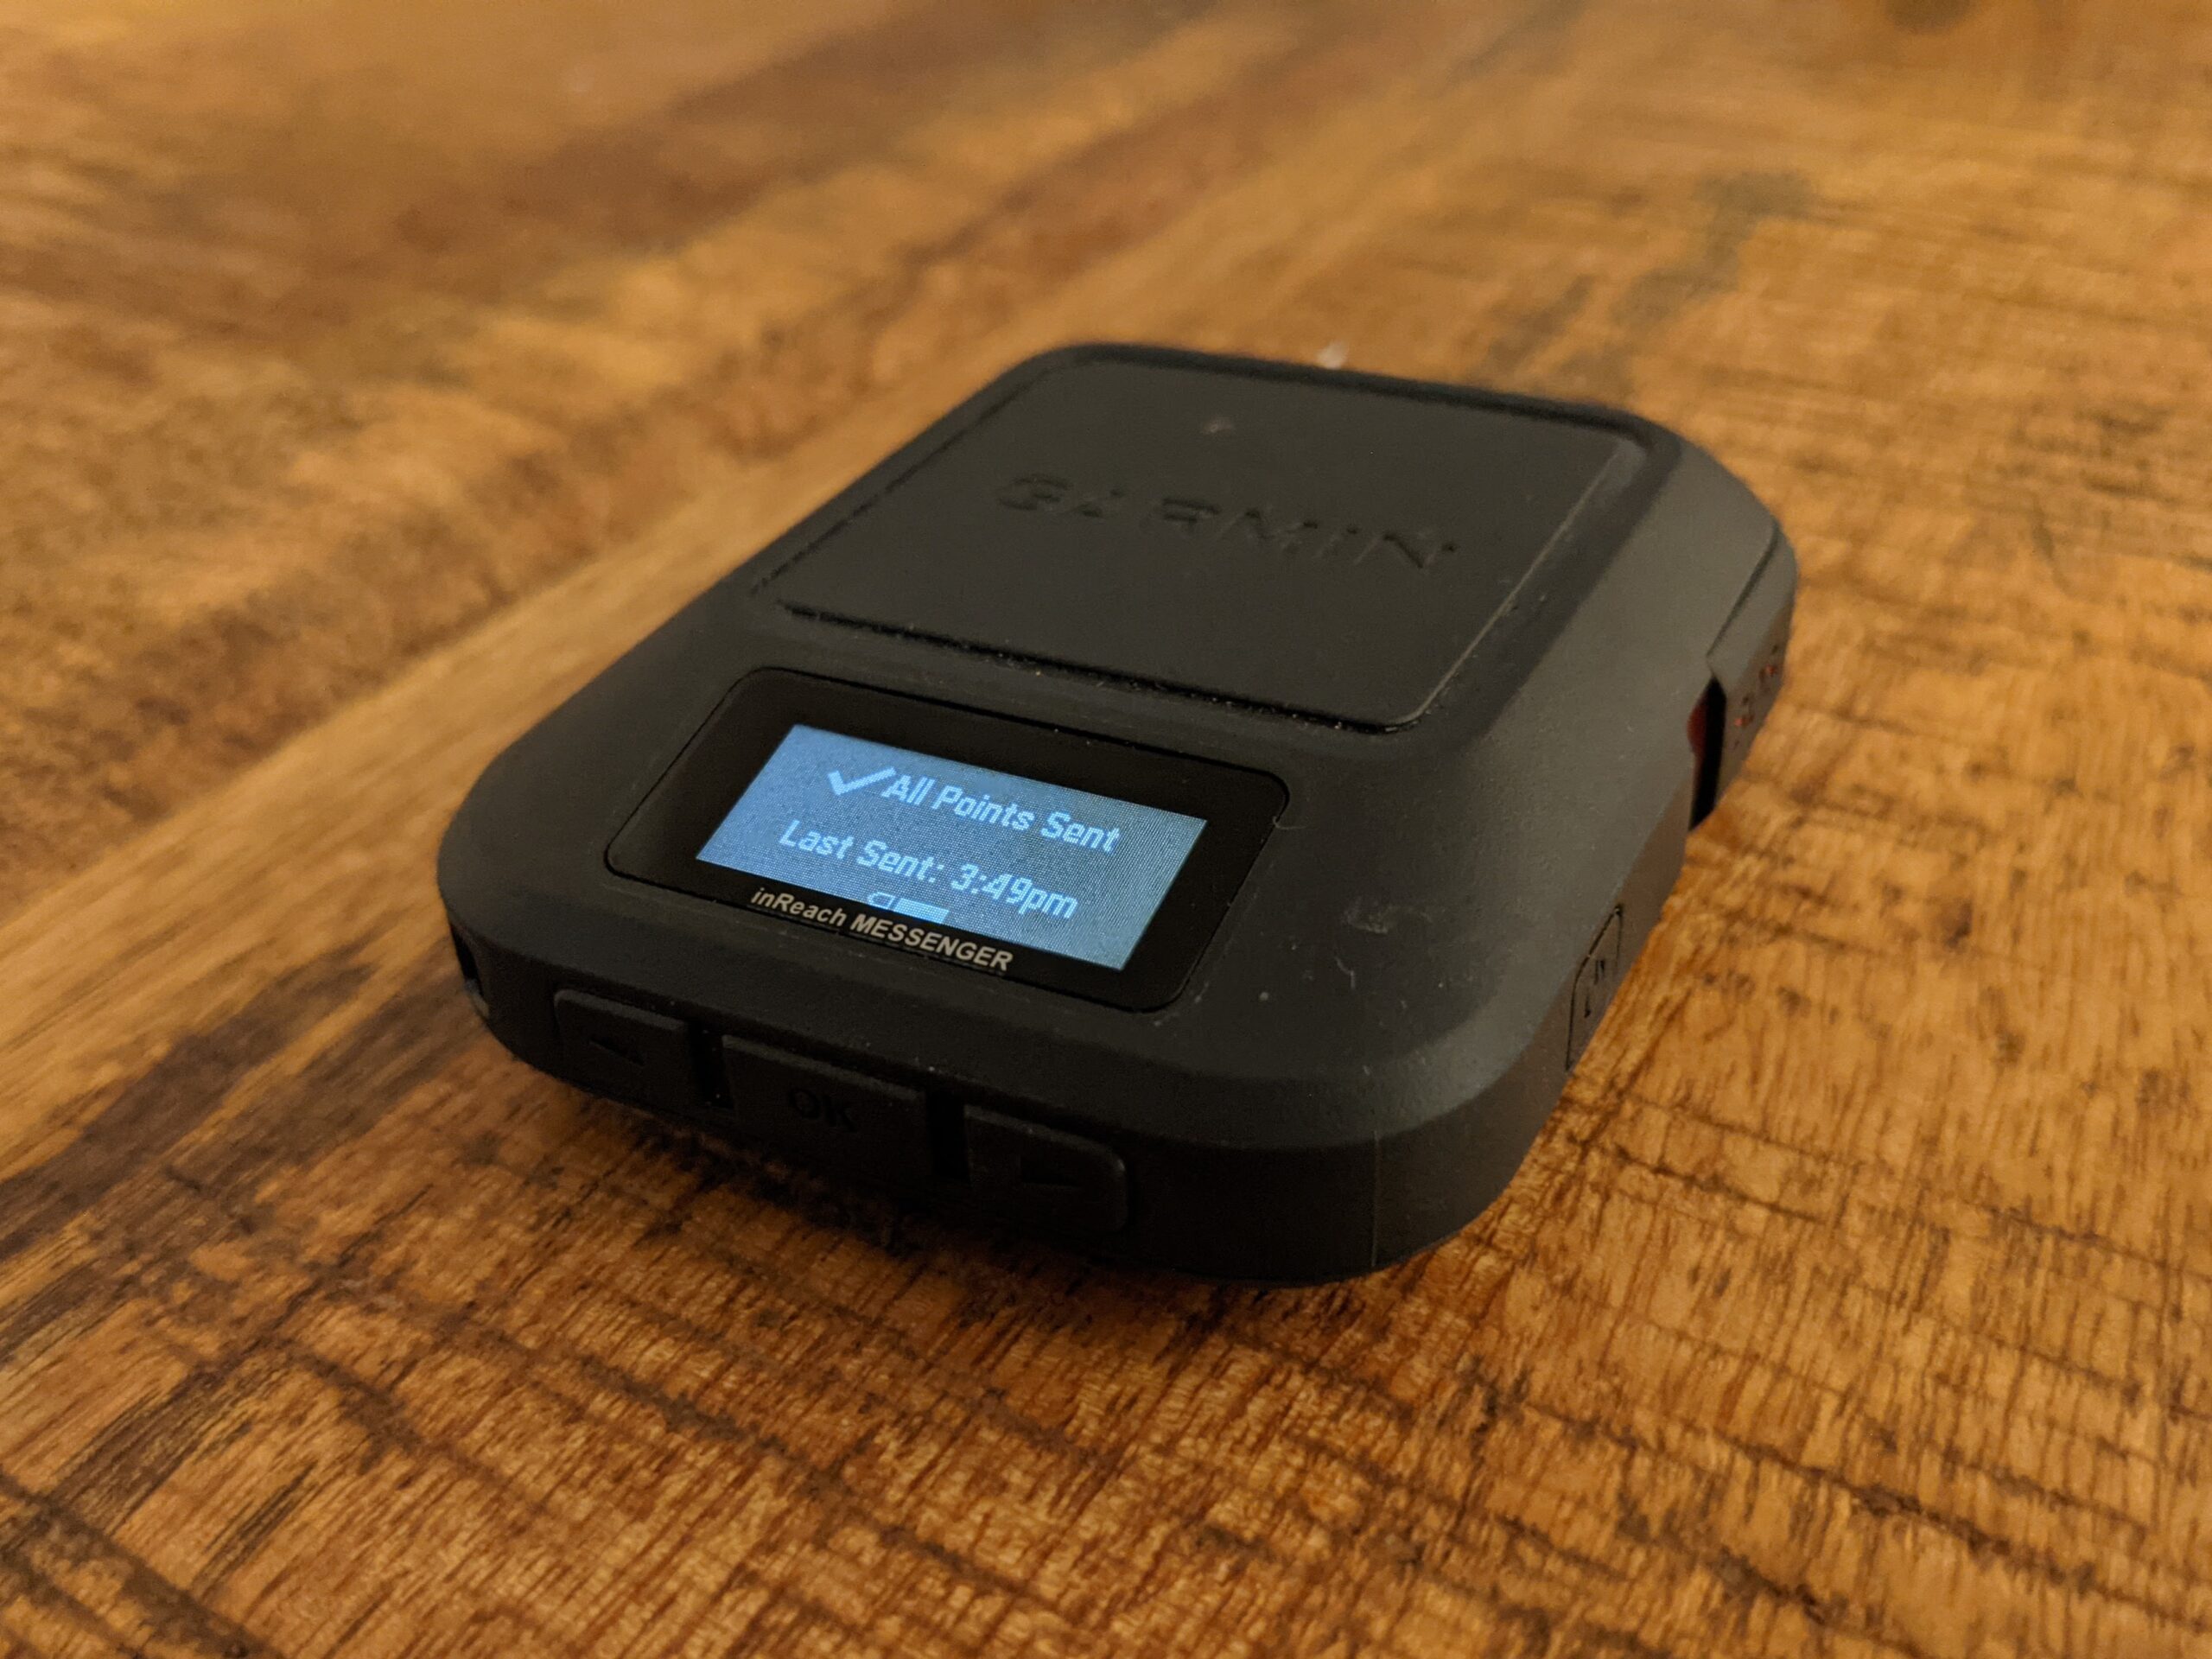 Three buttons on the bottom of the Garmin inReach Messenger provide plenty of functionality for toggling through the different menu options while a separate button on the side is used to send an SOS signal.